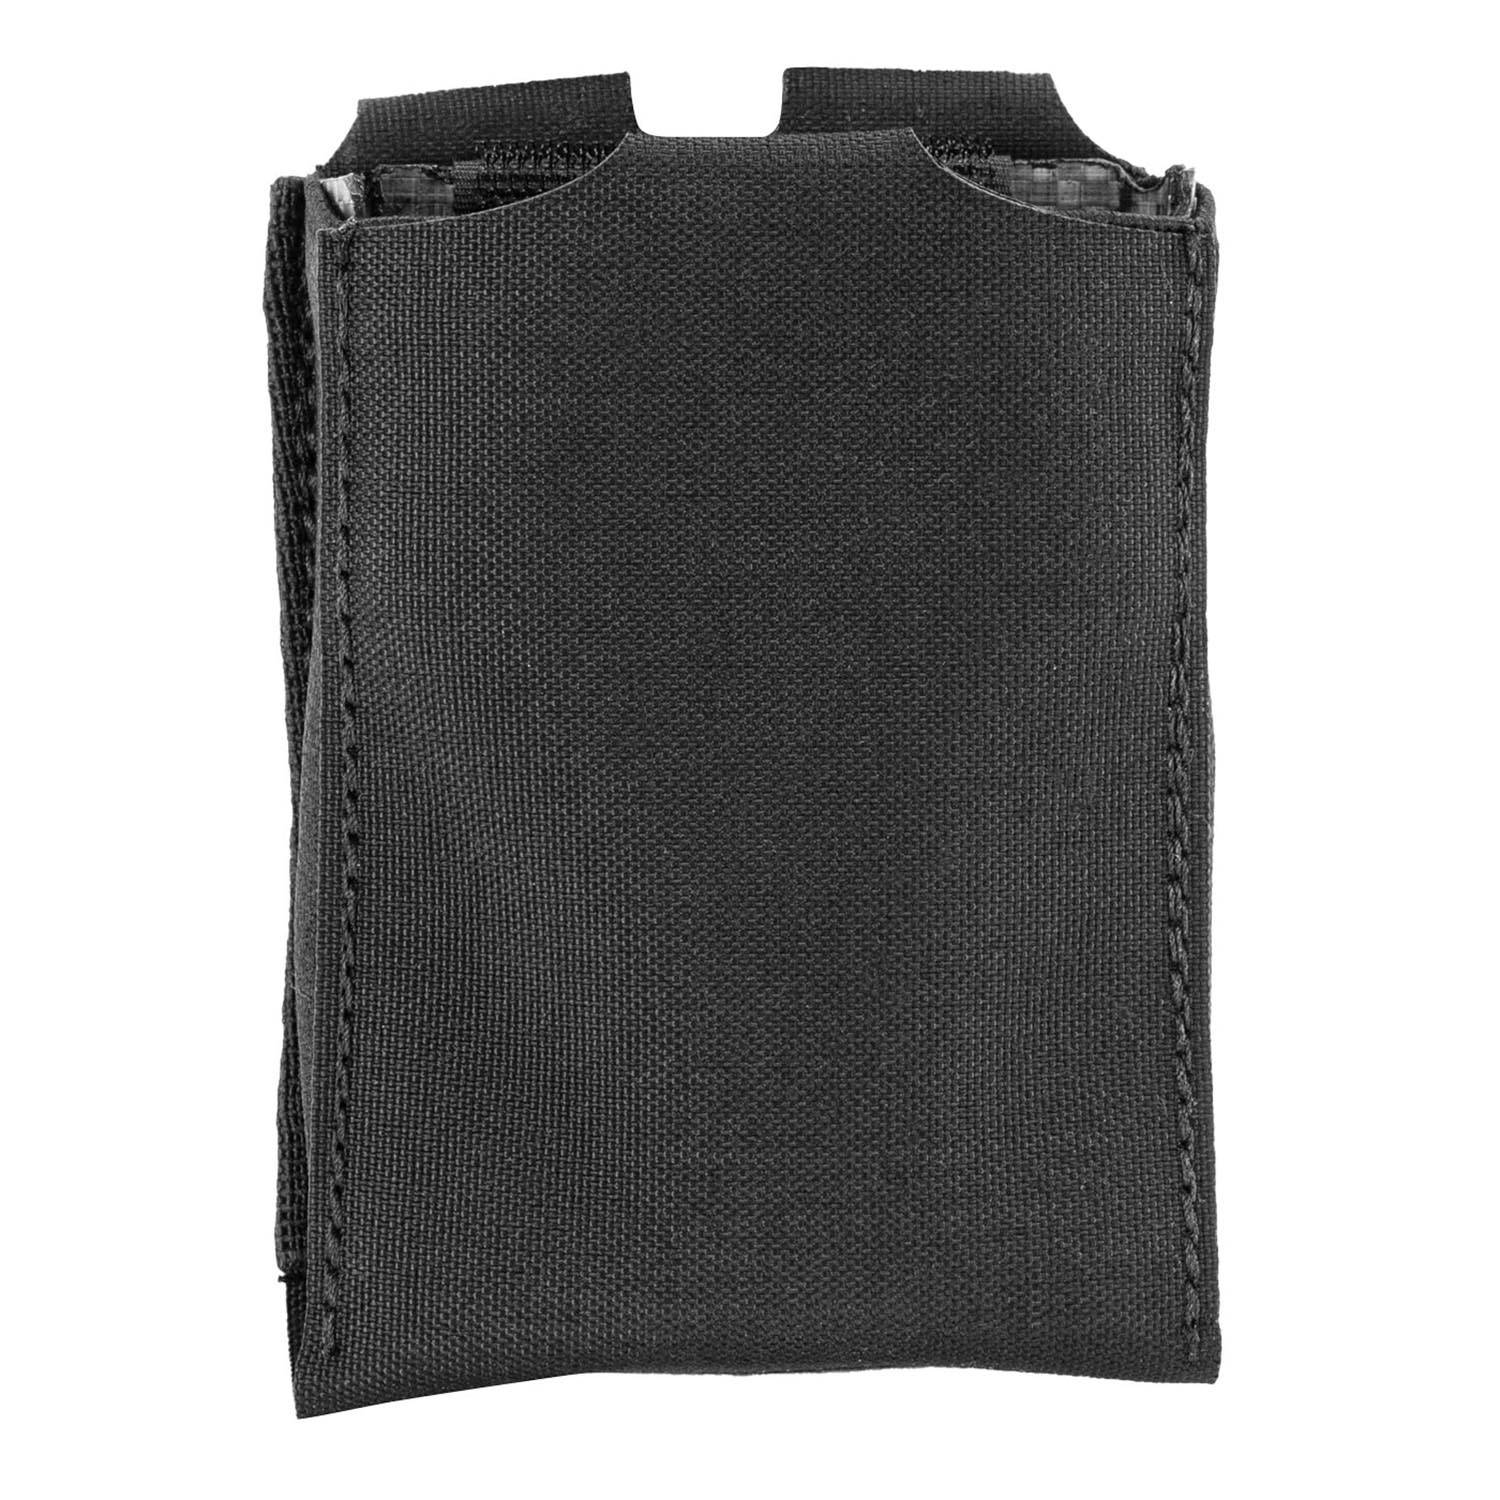 POINT BLANK SINGLE RIFLE MAG POUCH